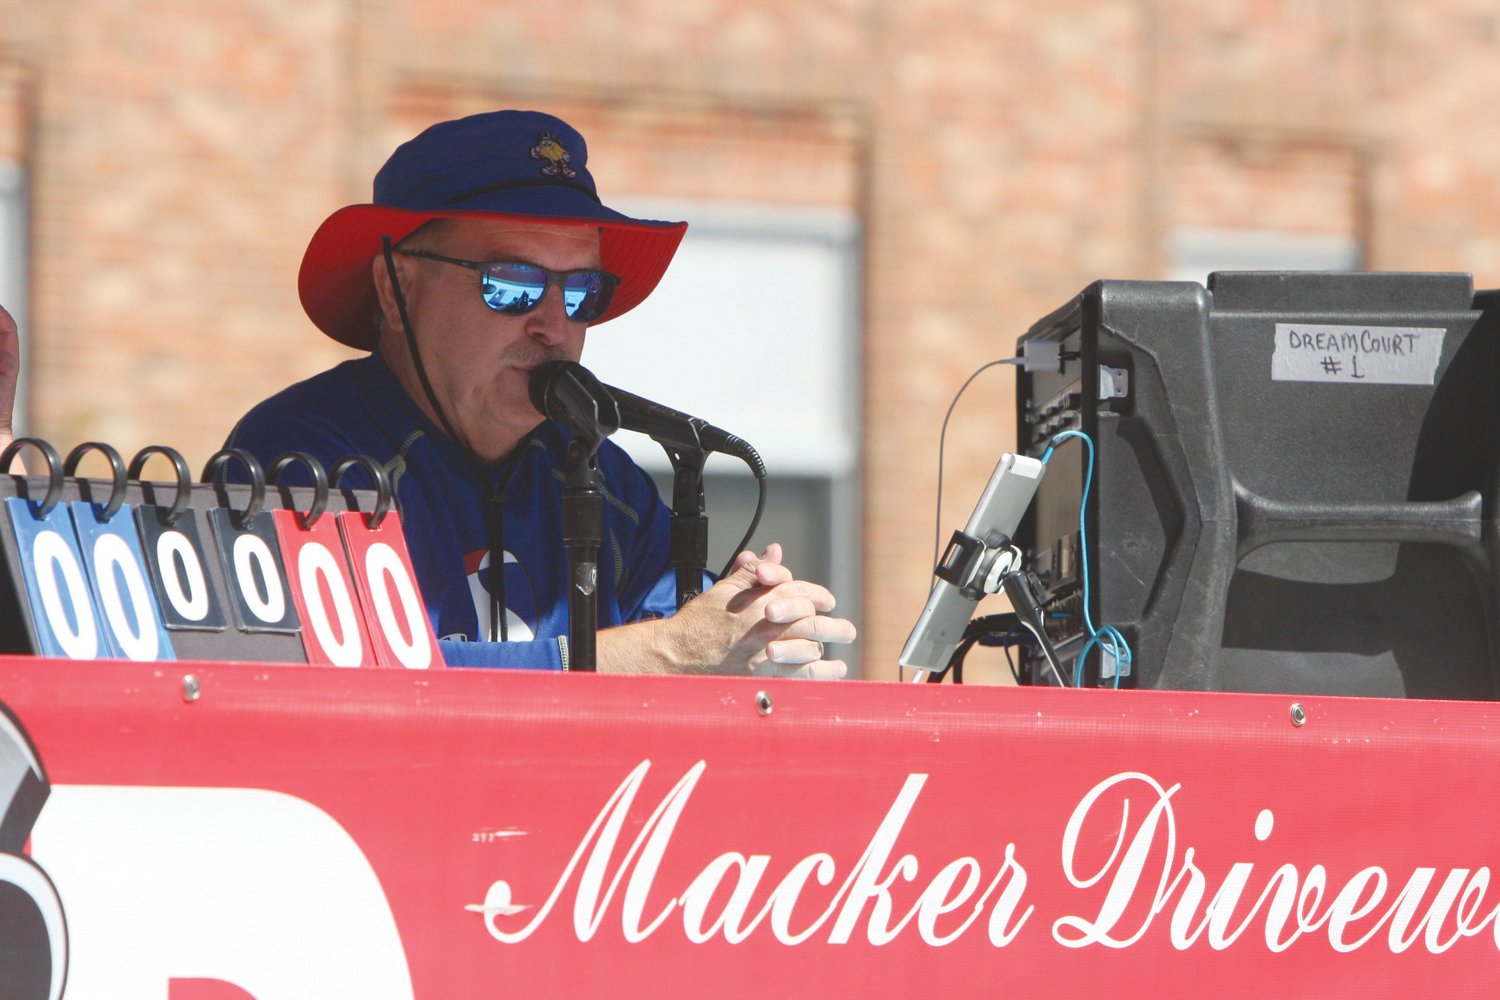 Scott McNeal does some announcing during a game at the Gus Macker 3-on-3 Basketball Tournament on Sept. 25 in Moberly. Theo Tate photo